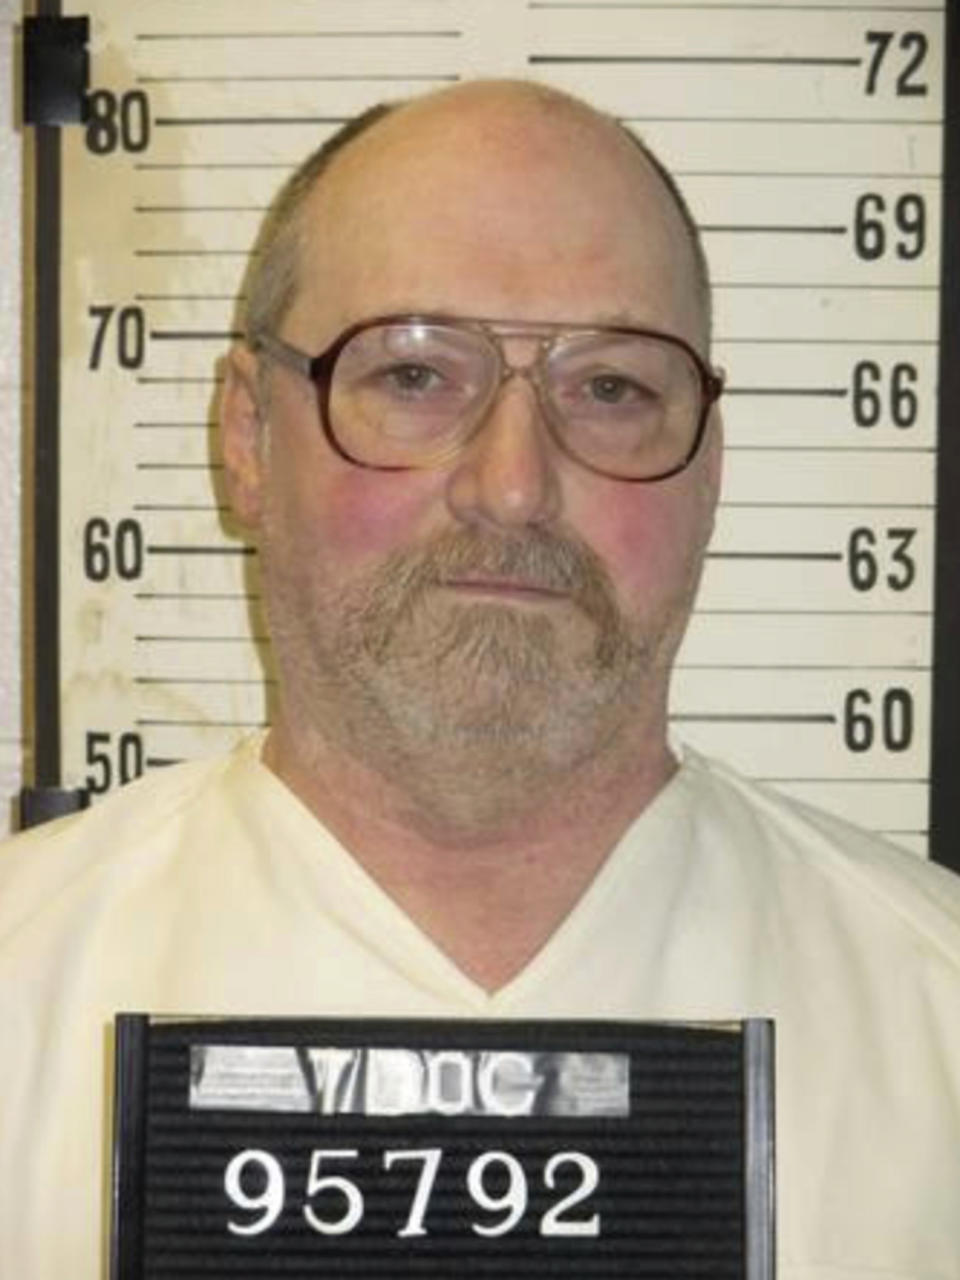 This undated photo provided by the Tennessee Department of Correction shows death row inmate David Earl Miller in Nashville, Tenn. Miller, 61, has been moved to the state’s death watch ahead of his scheduled execution Thursday, Dec. 2018. Miller, who has been on death row for 36 years, was sentenced to death for the 1981 murder of 23-year-old Lee Standifer in Knoxville. (Tennessee Department of Correction via AP)